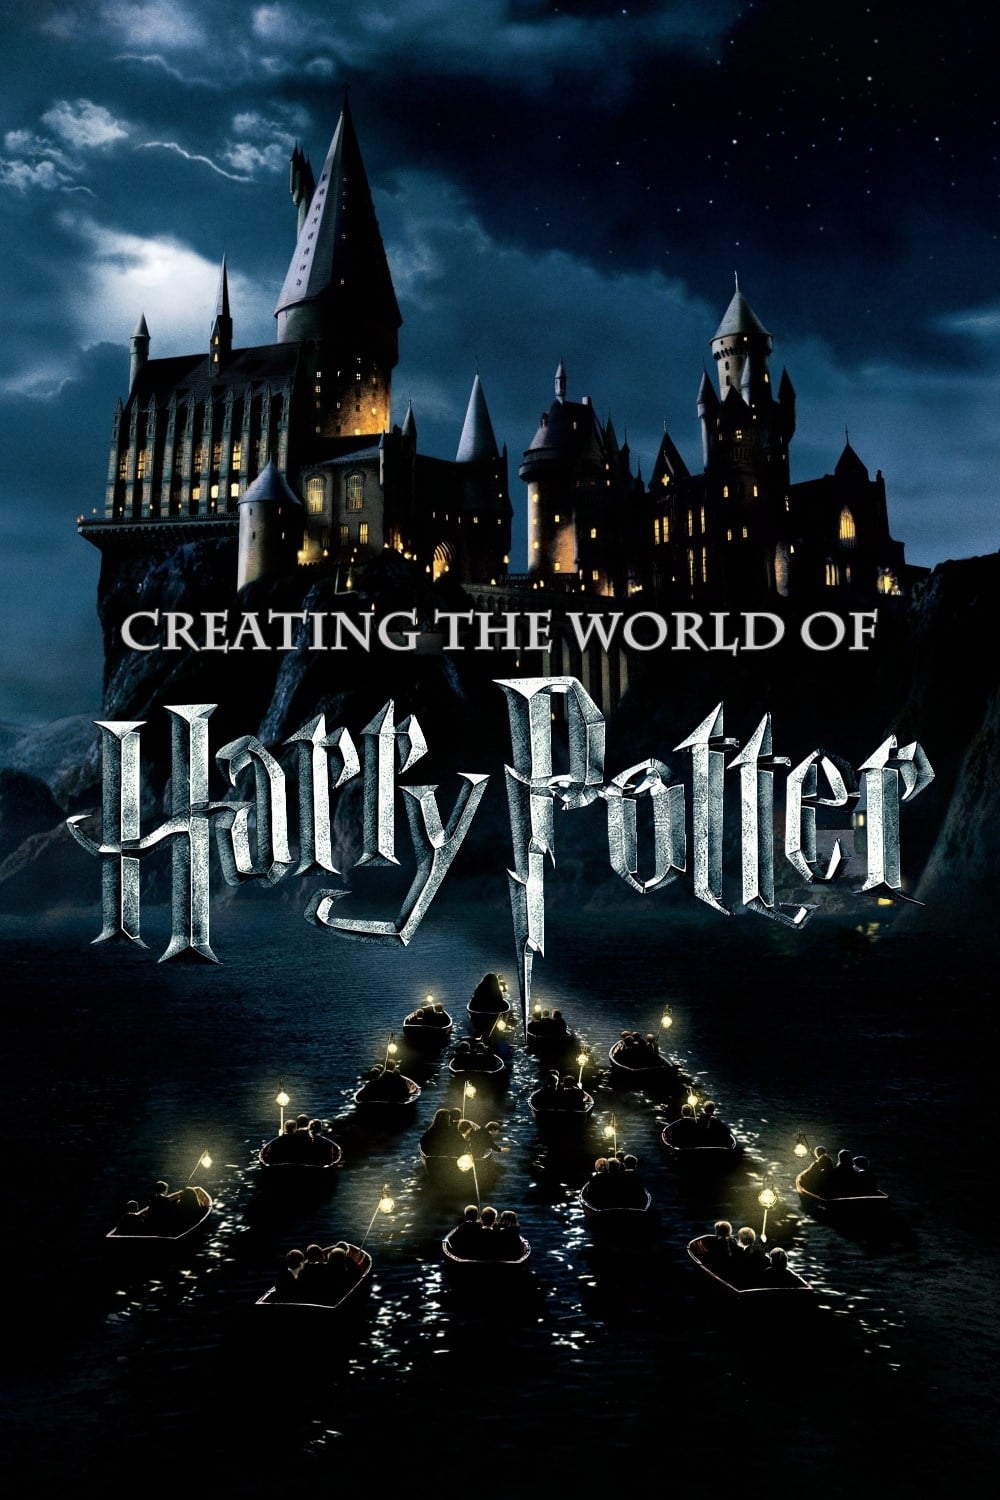 Creating The World of Harry Potter. Part 1: The Magic Begins